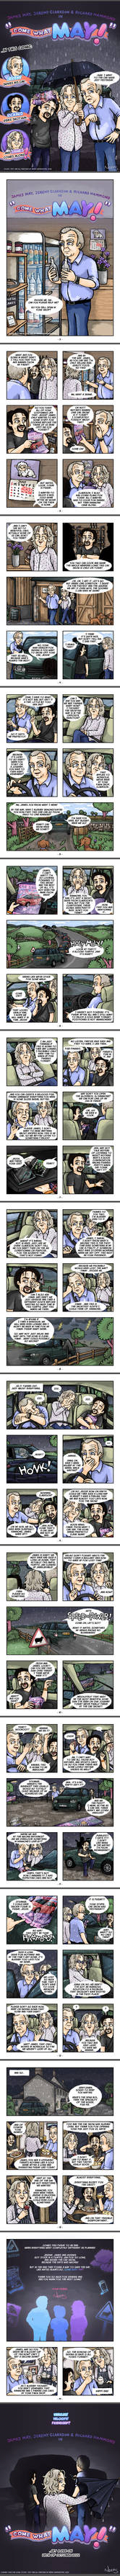 The Grand Tour Comic 'Come what May!'